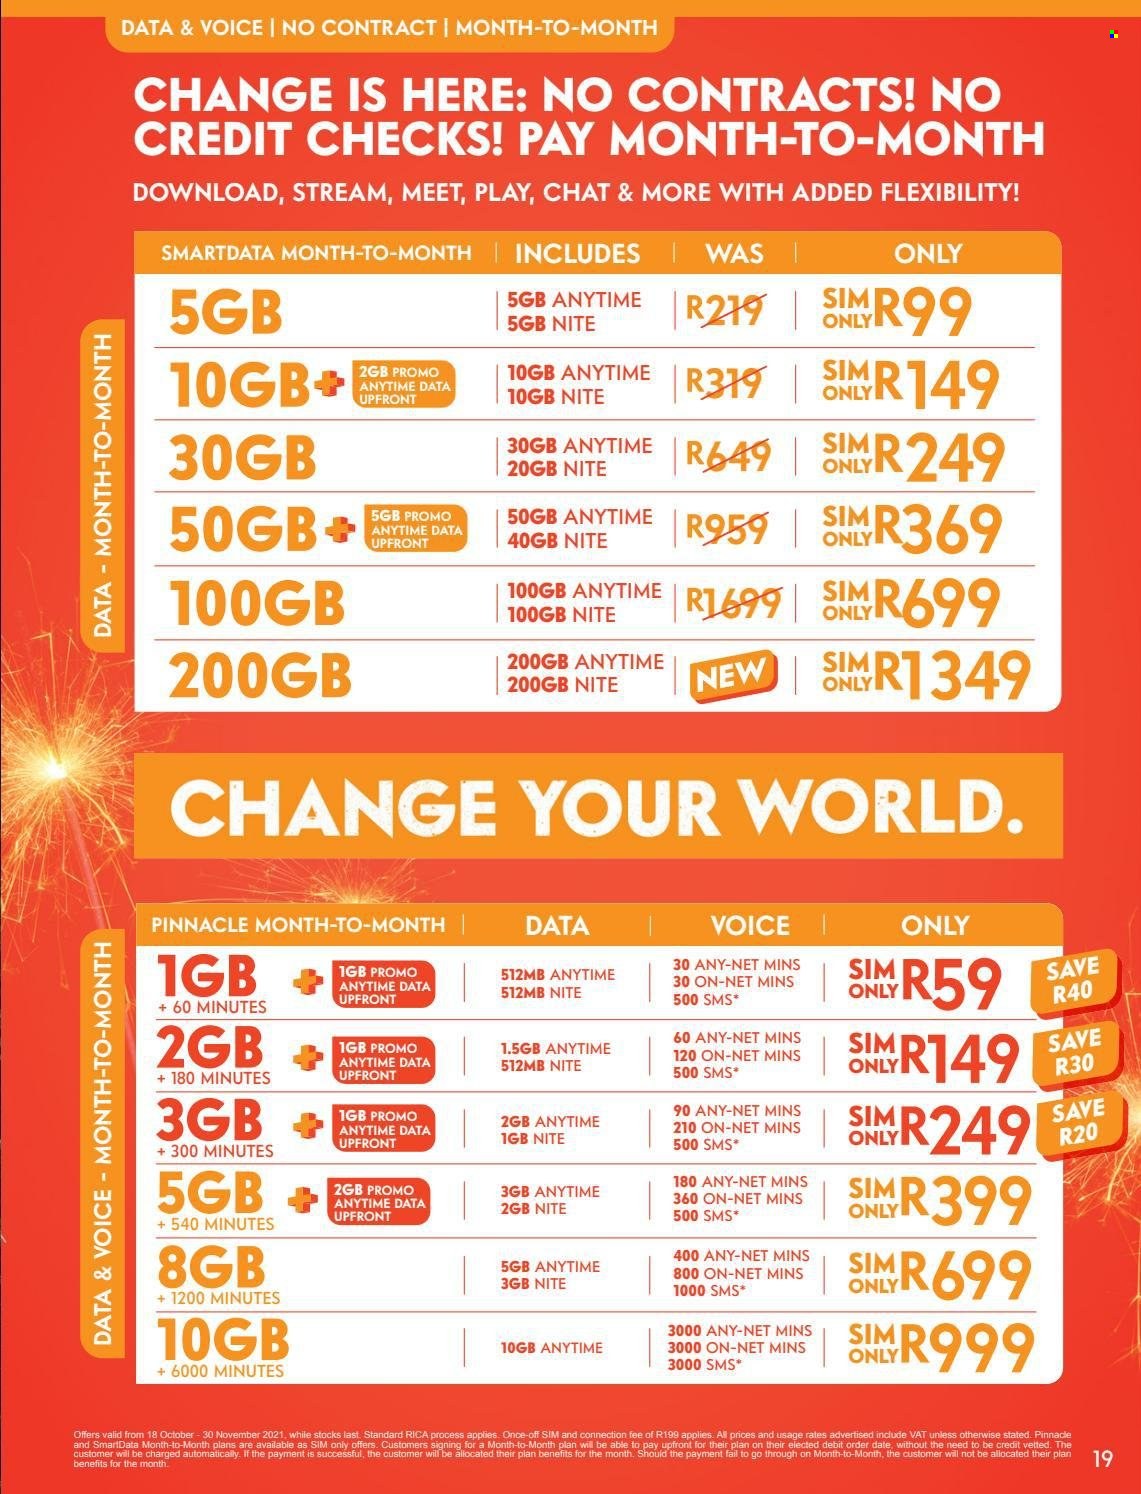 Cell C specials - 10.18.2021 - 11.30.2021. 